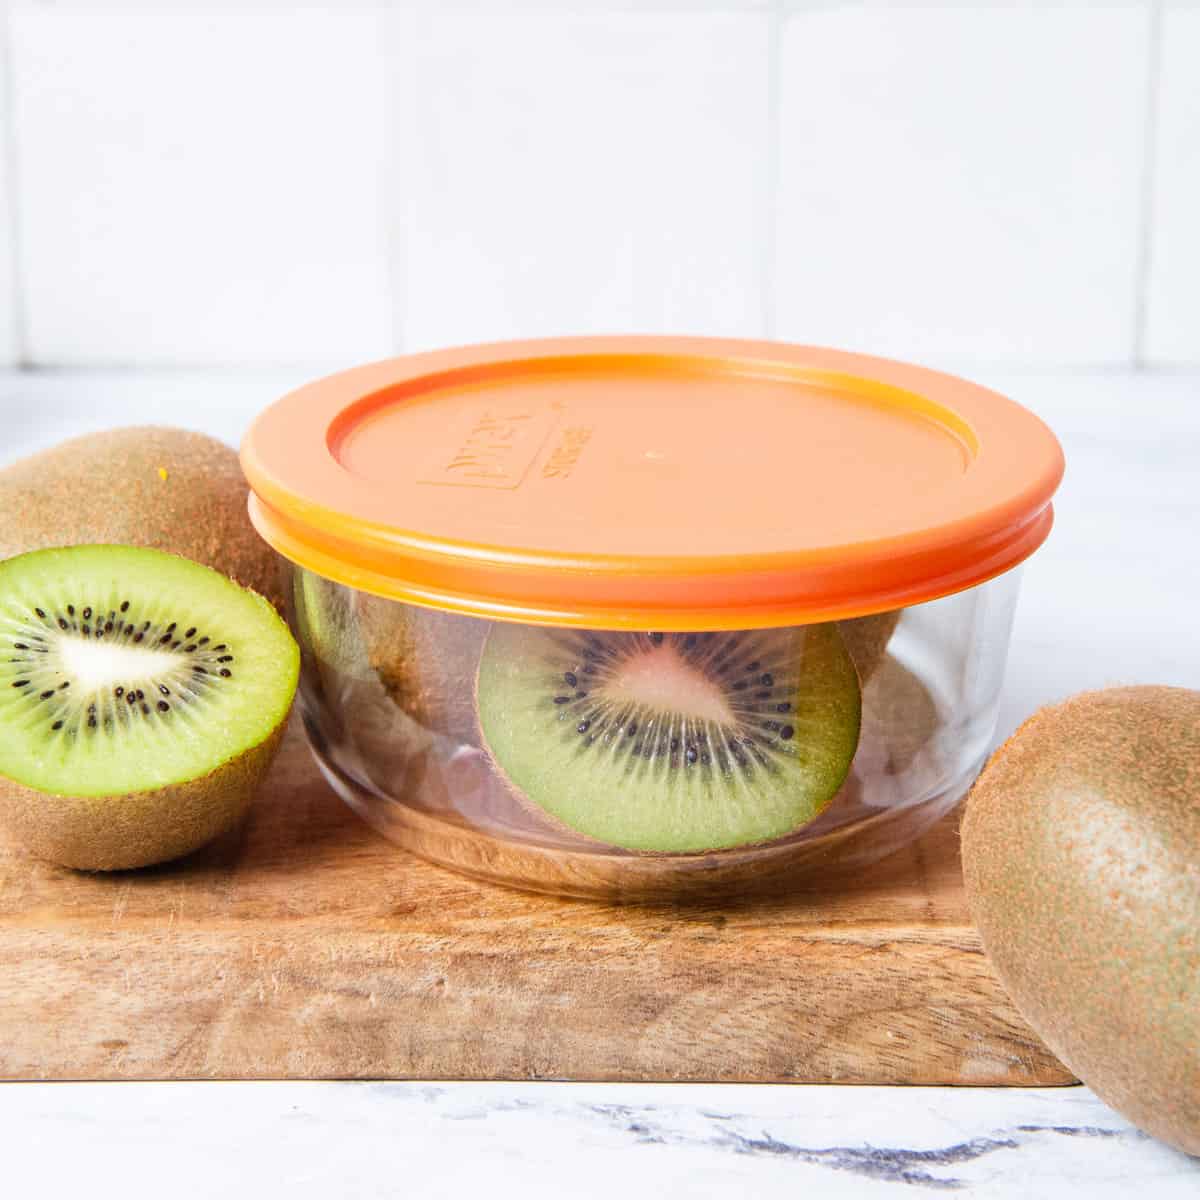 Kiwi cut and stored in glass container.